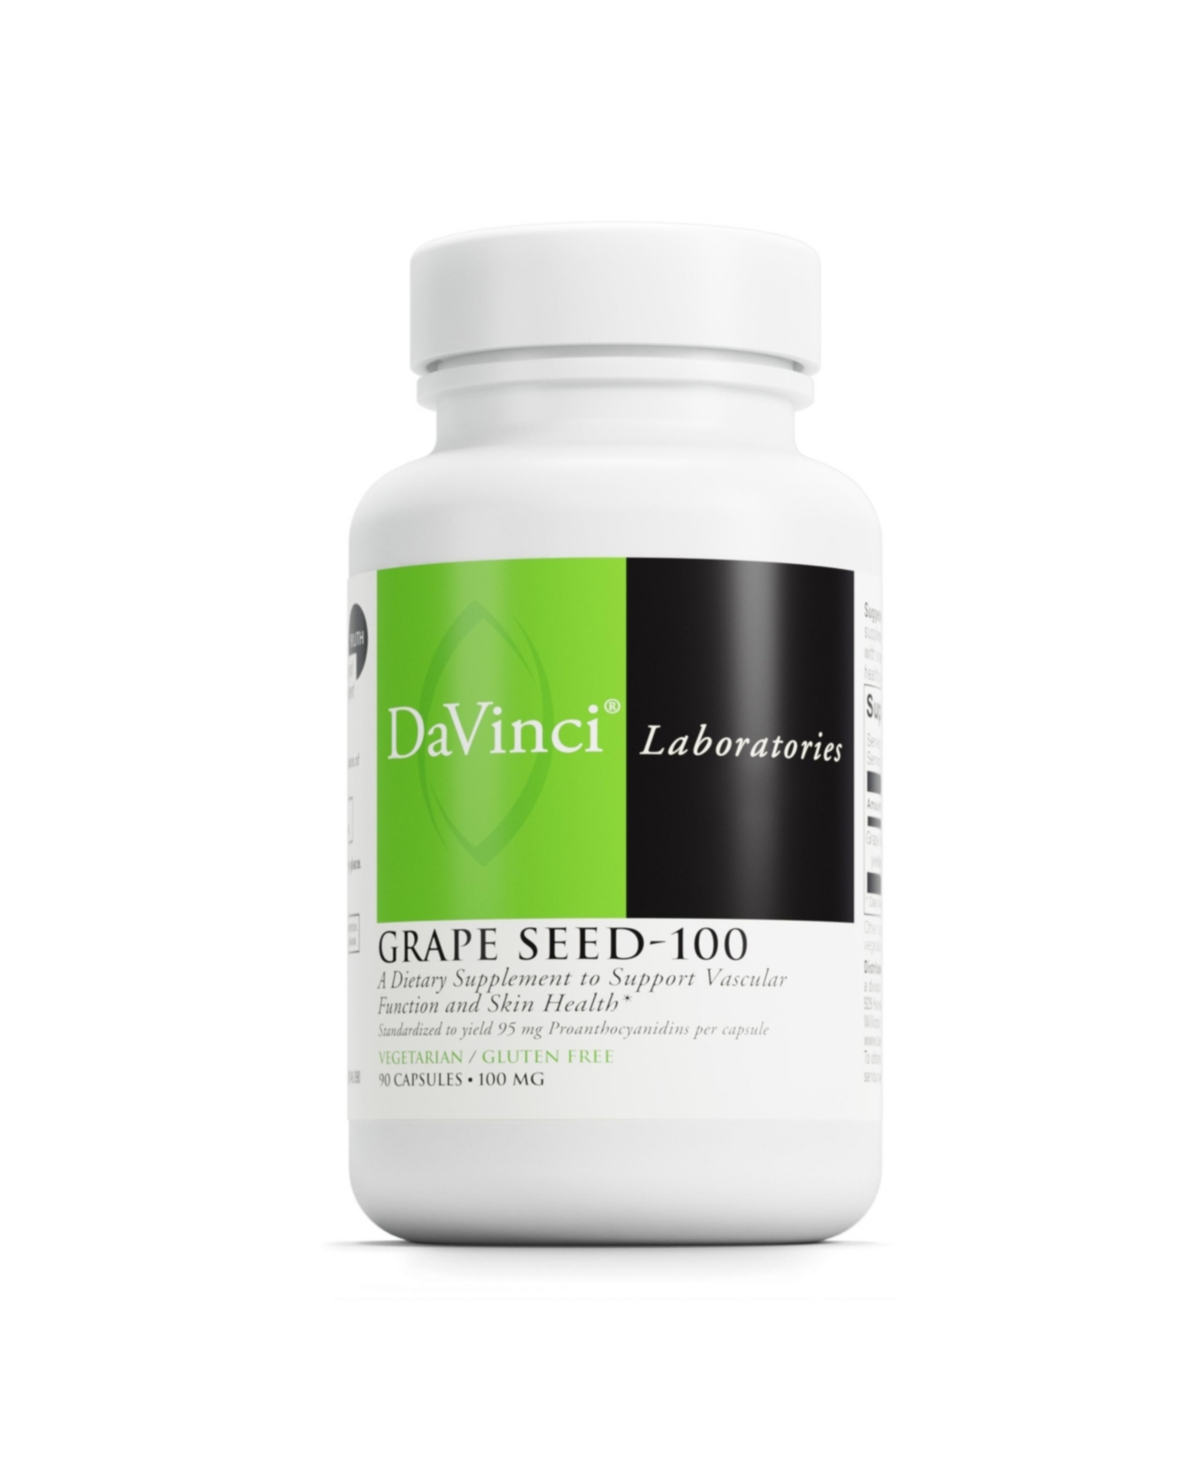 DaVinci Labs Grape Seed-100 - Dietary Supplement to Support Immune System, Vascular Function and Healthy Skin - With 100 mg Grape Seed Extract per Ser